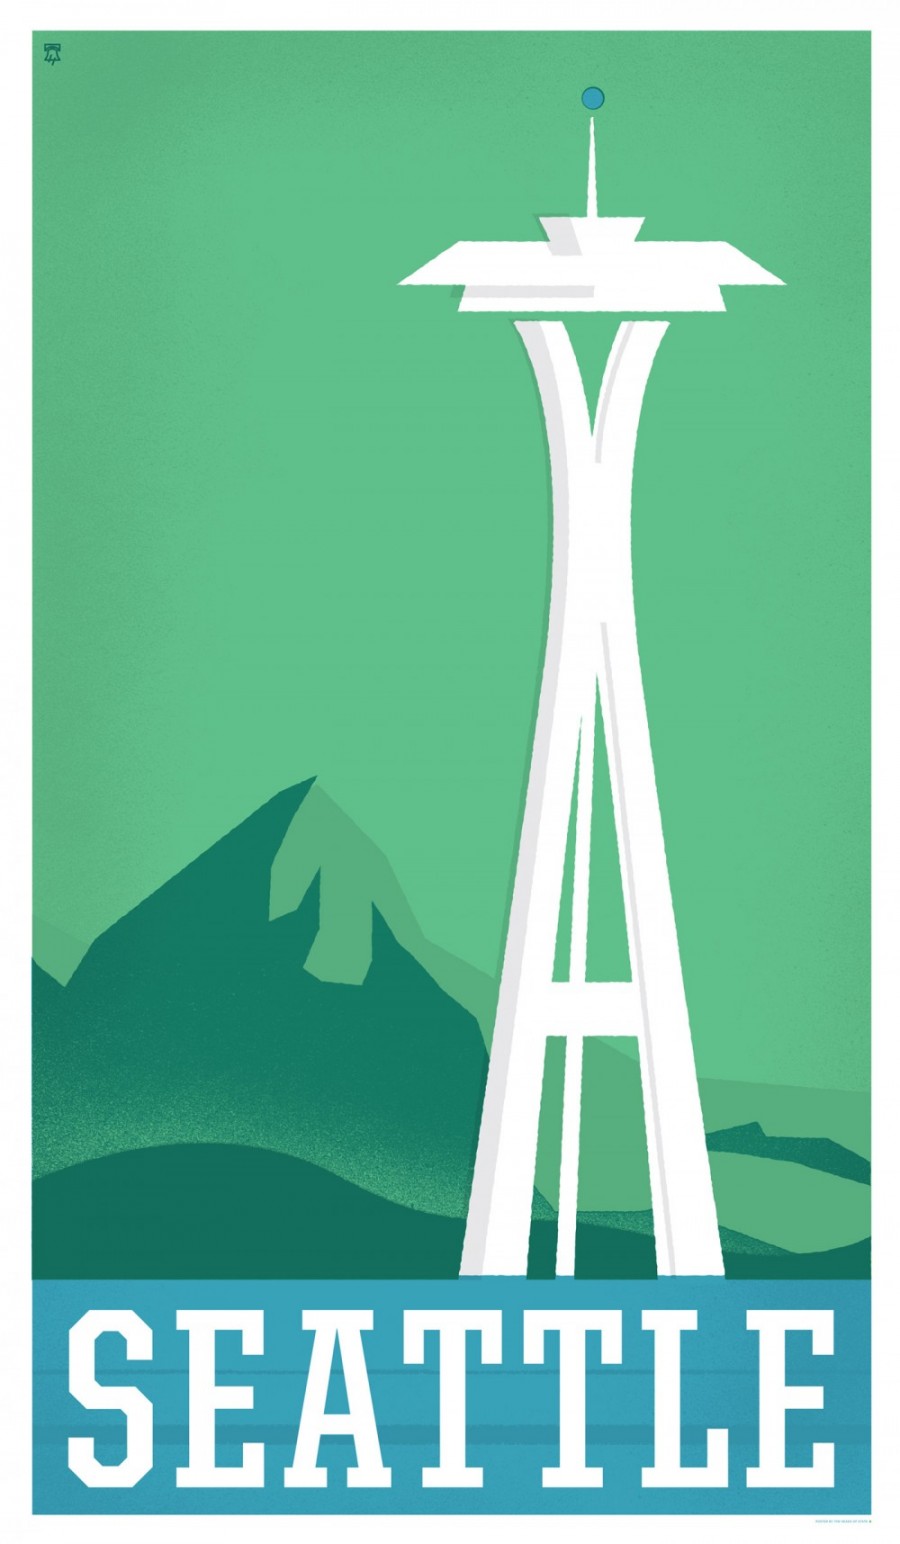 Seattle, Washington - Travel Poster Series - The Heads of State